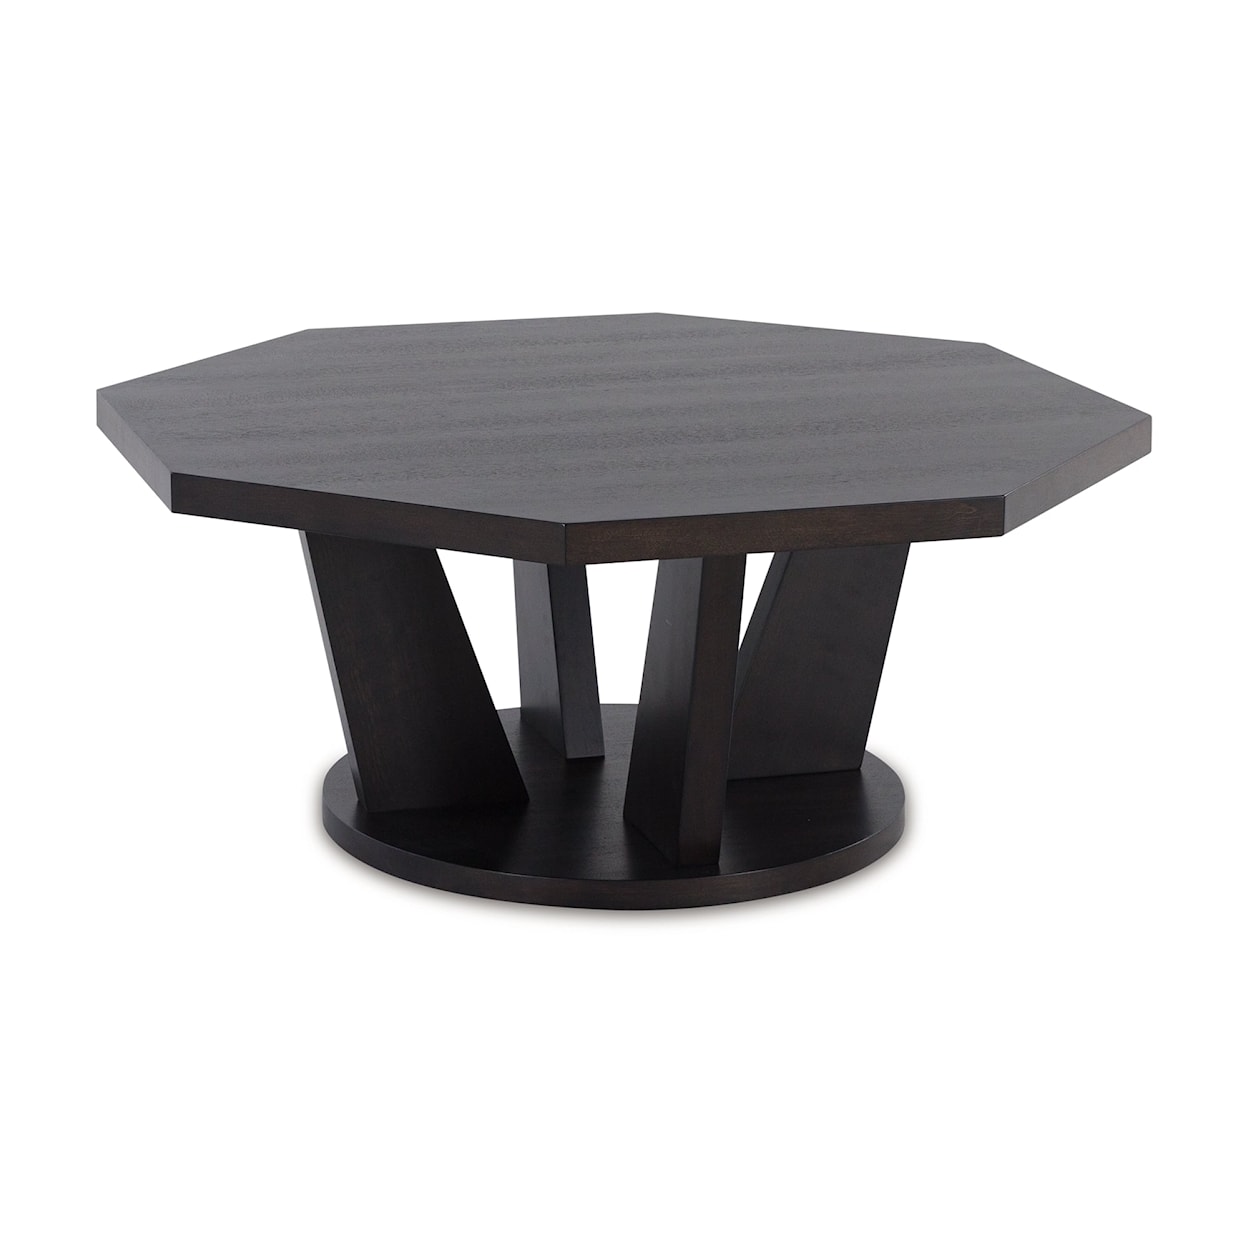 Ashley Furniture Signature Design Chasinfield Octagon Cocktail Table